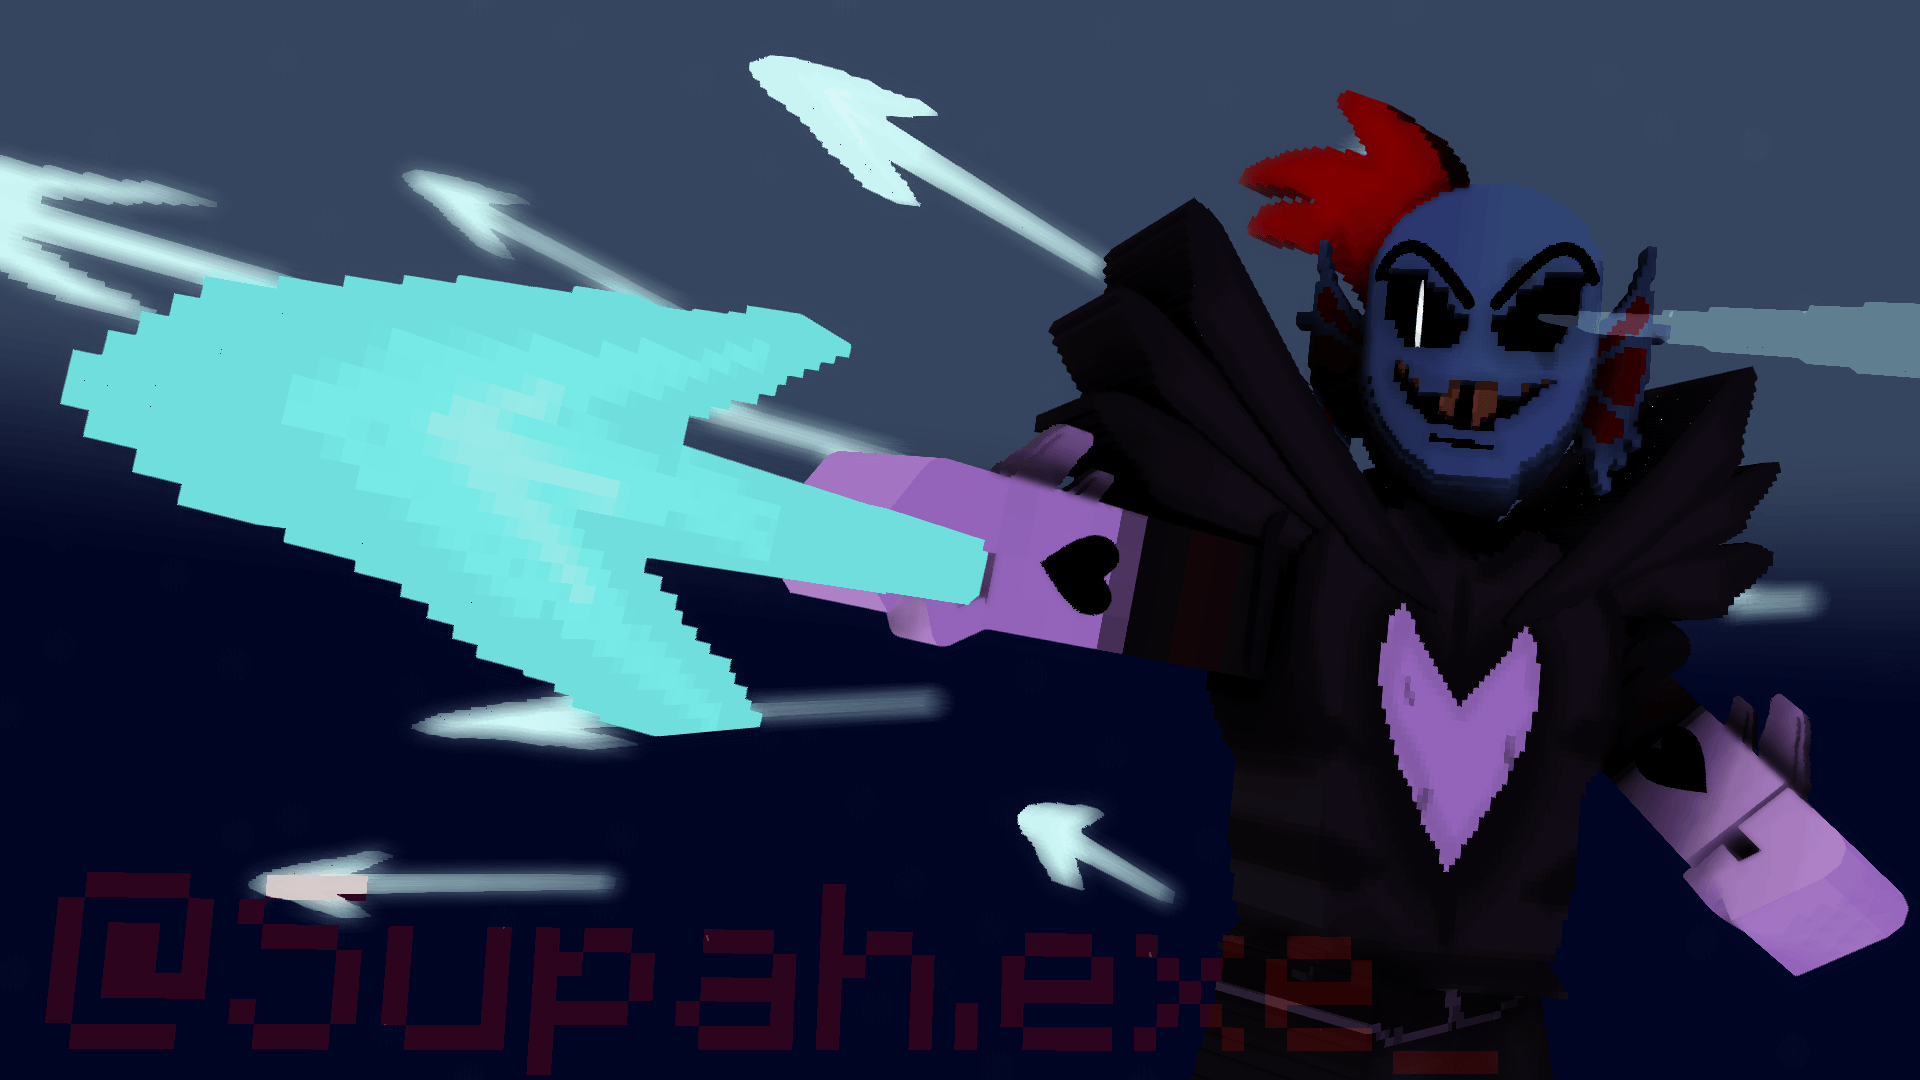 Free download Undyne the Undying Undertale Wallpaper and art Mine